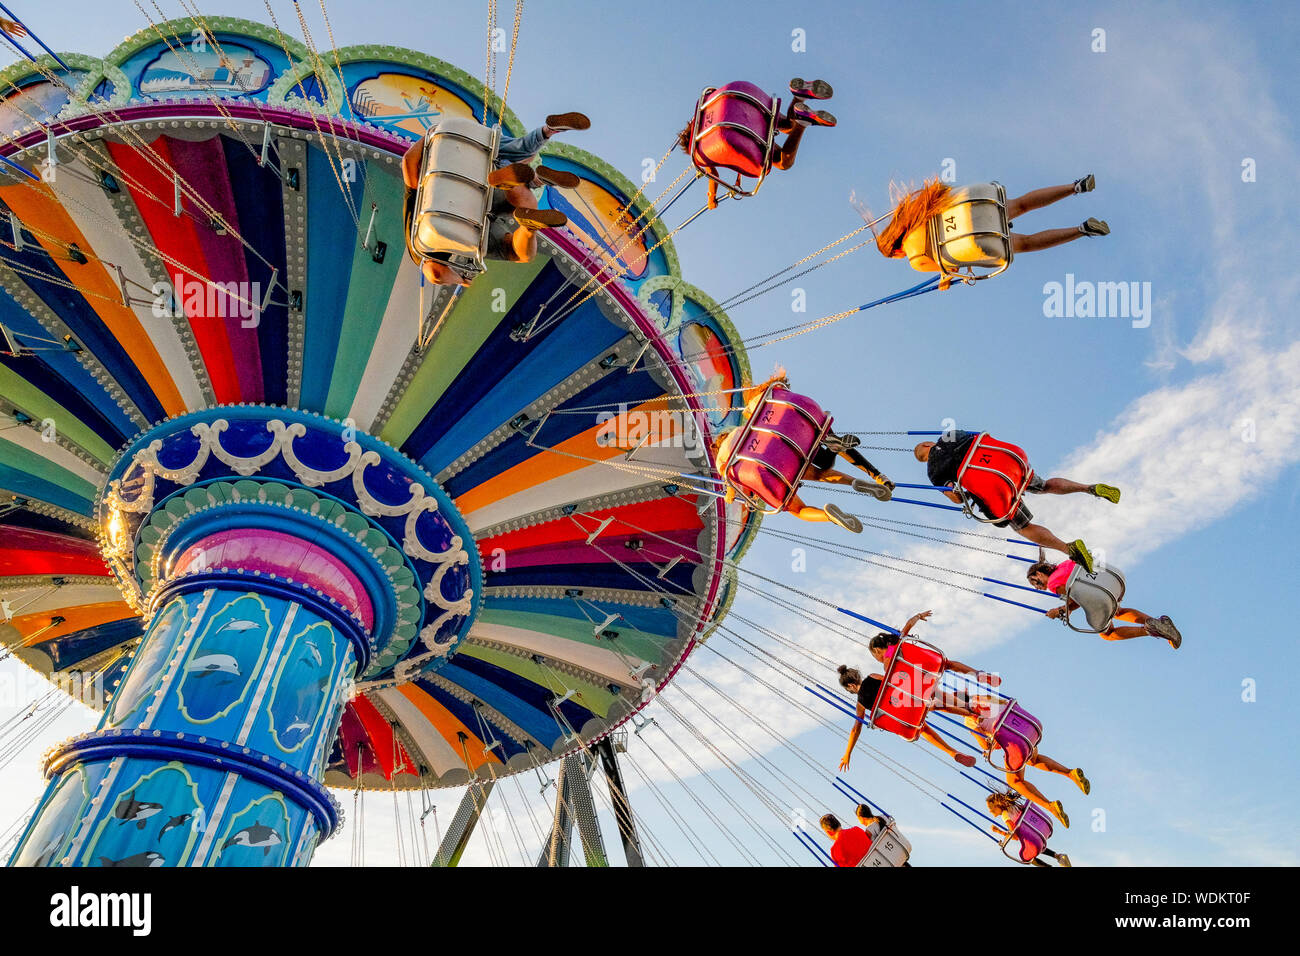 Sea to Sky Swinger, Playland, Hastings Park, Vancouver, British Columbia, Canada Foto Stock